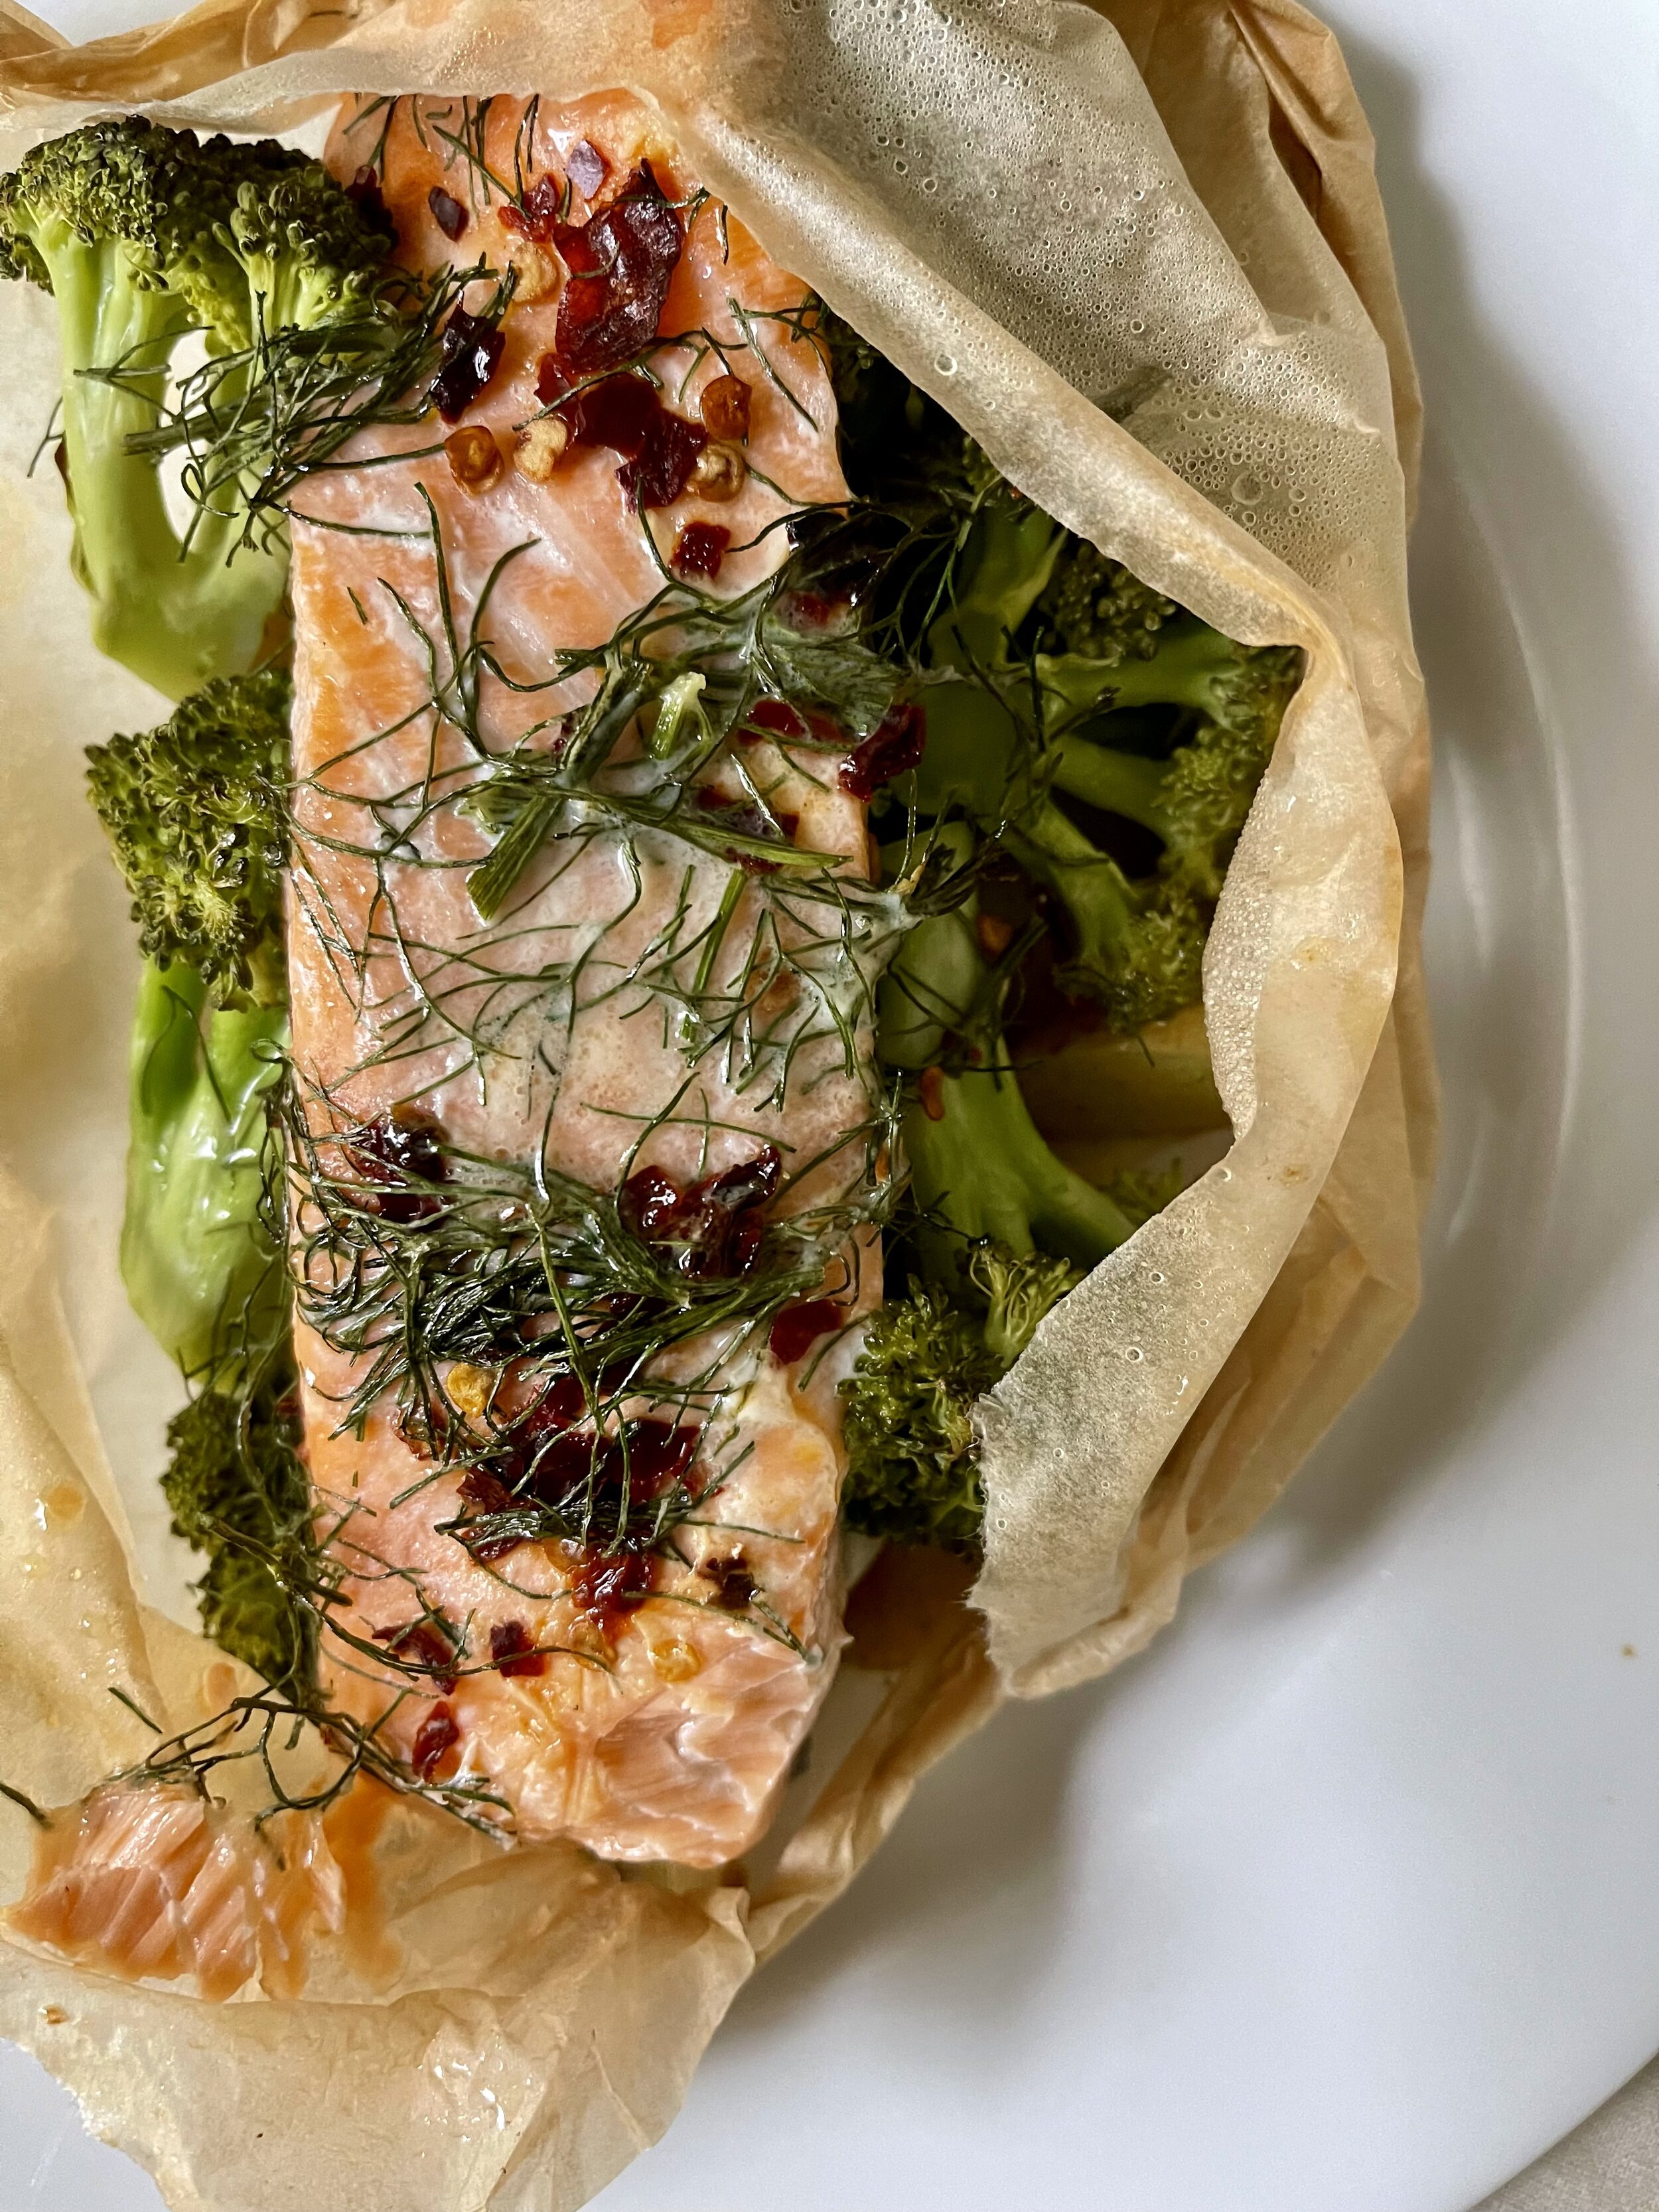 Salmon en Papillote with Broccoli and New Potatoes — baguette & butter